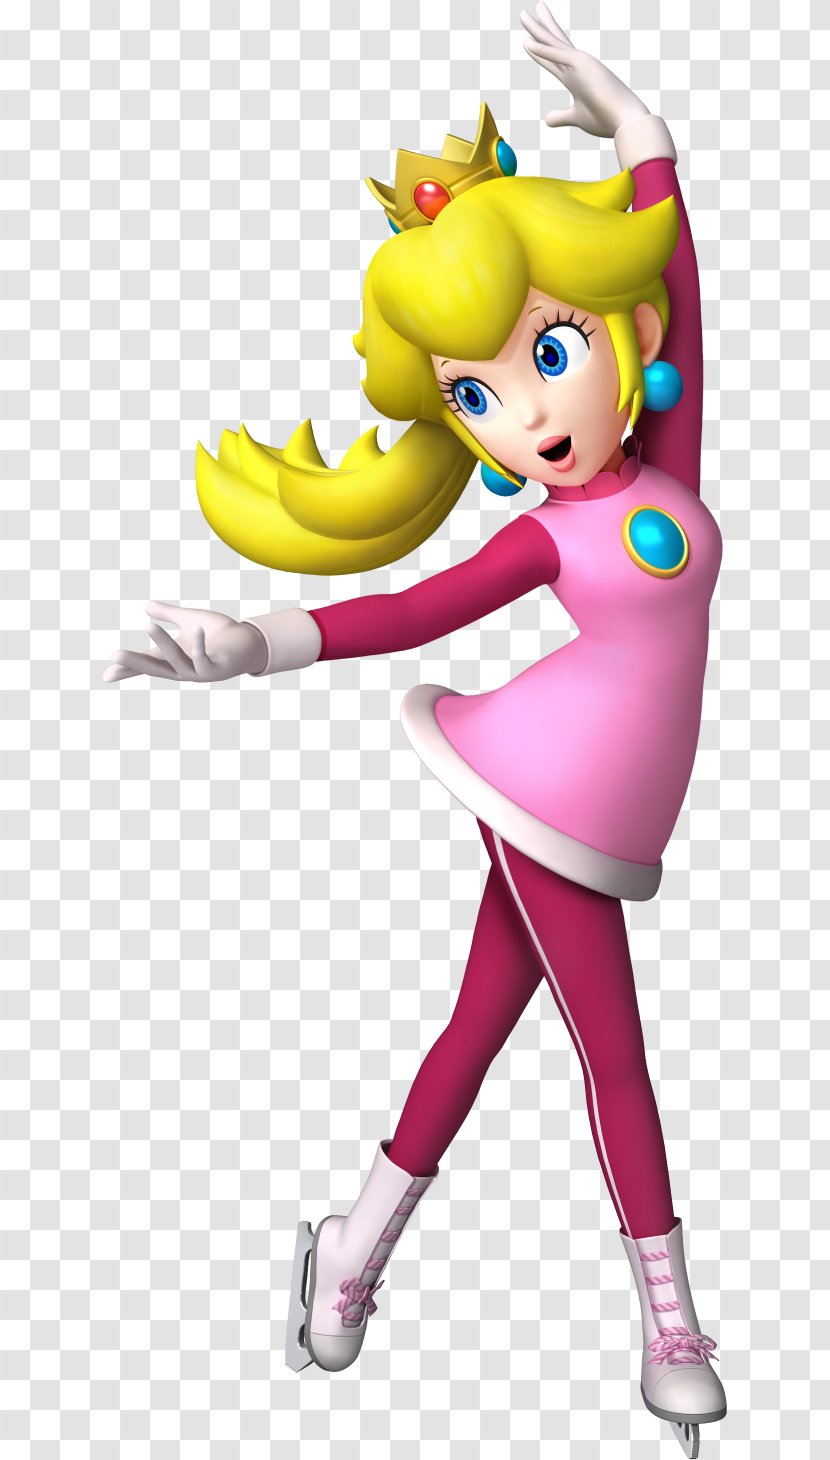 Mario & Sonic At The Olympic Games Princess Peach Winter Daisy - Ace Attorney Transparent PNG